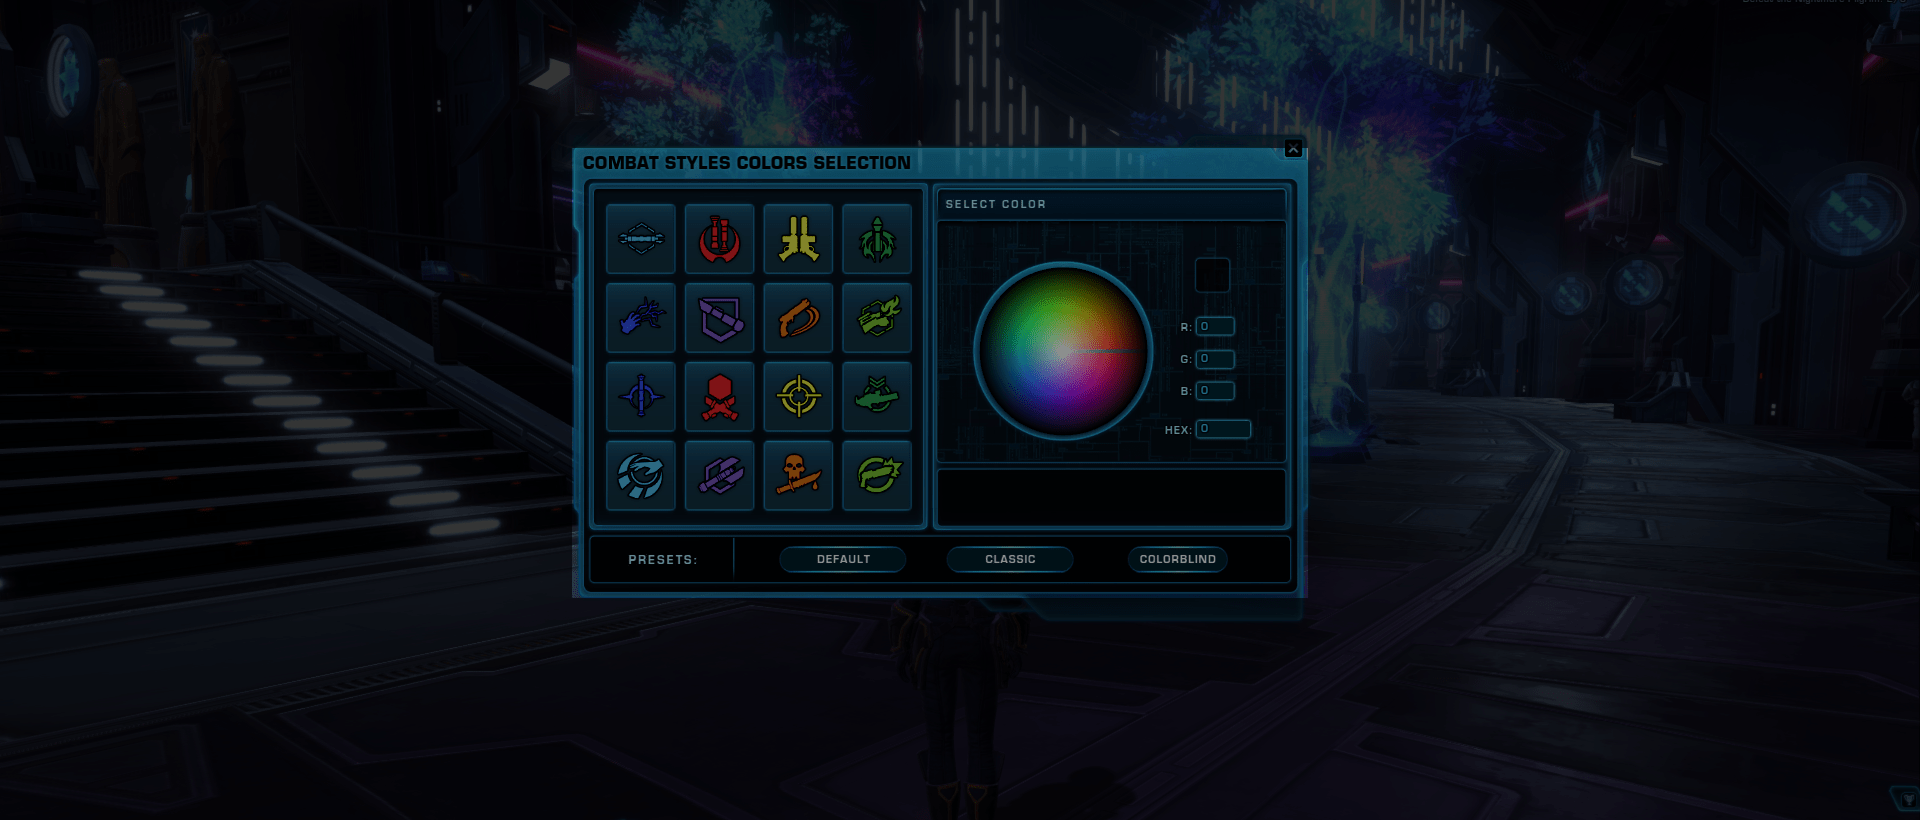 SWTOR Combat Styles Symbol Colour Selection Guide